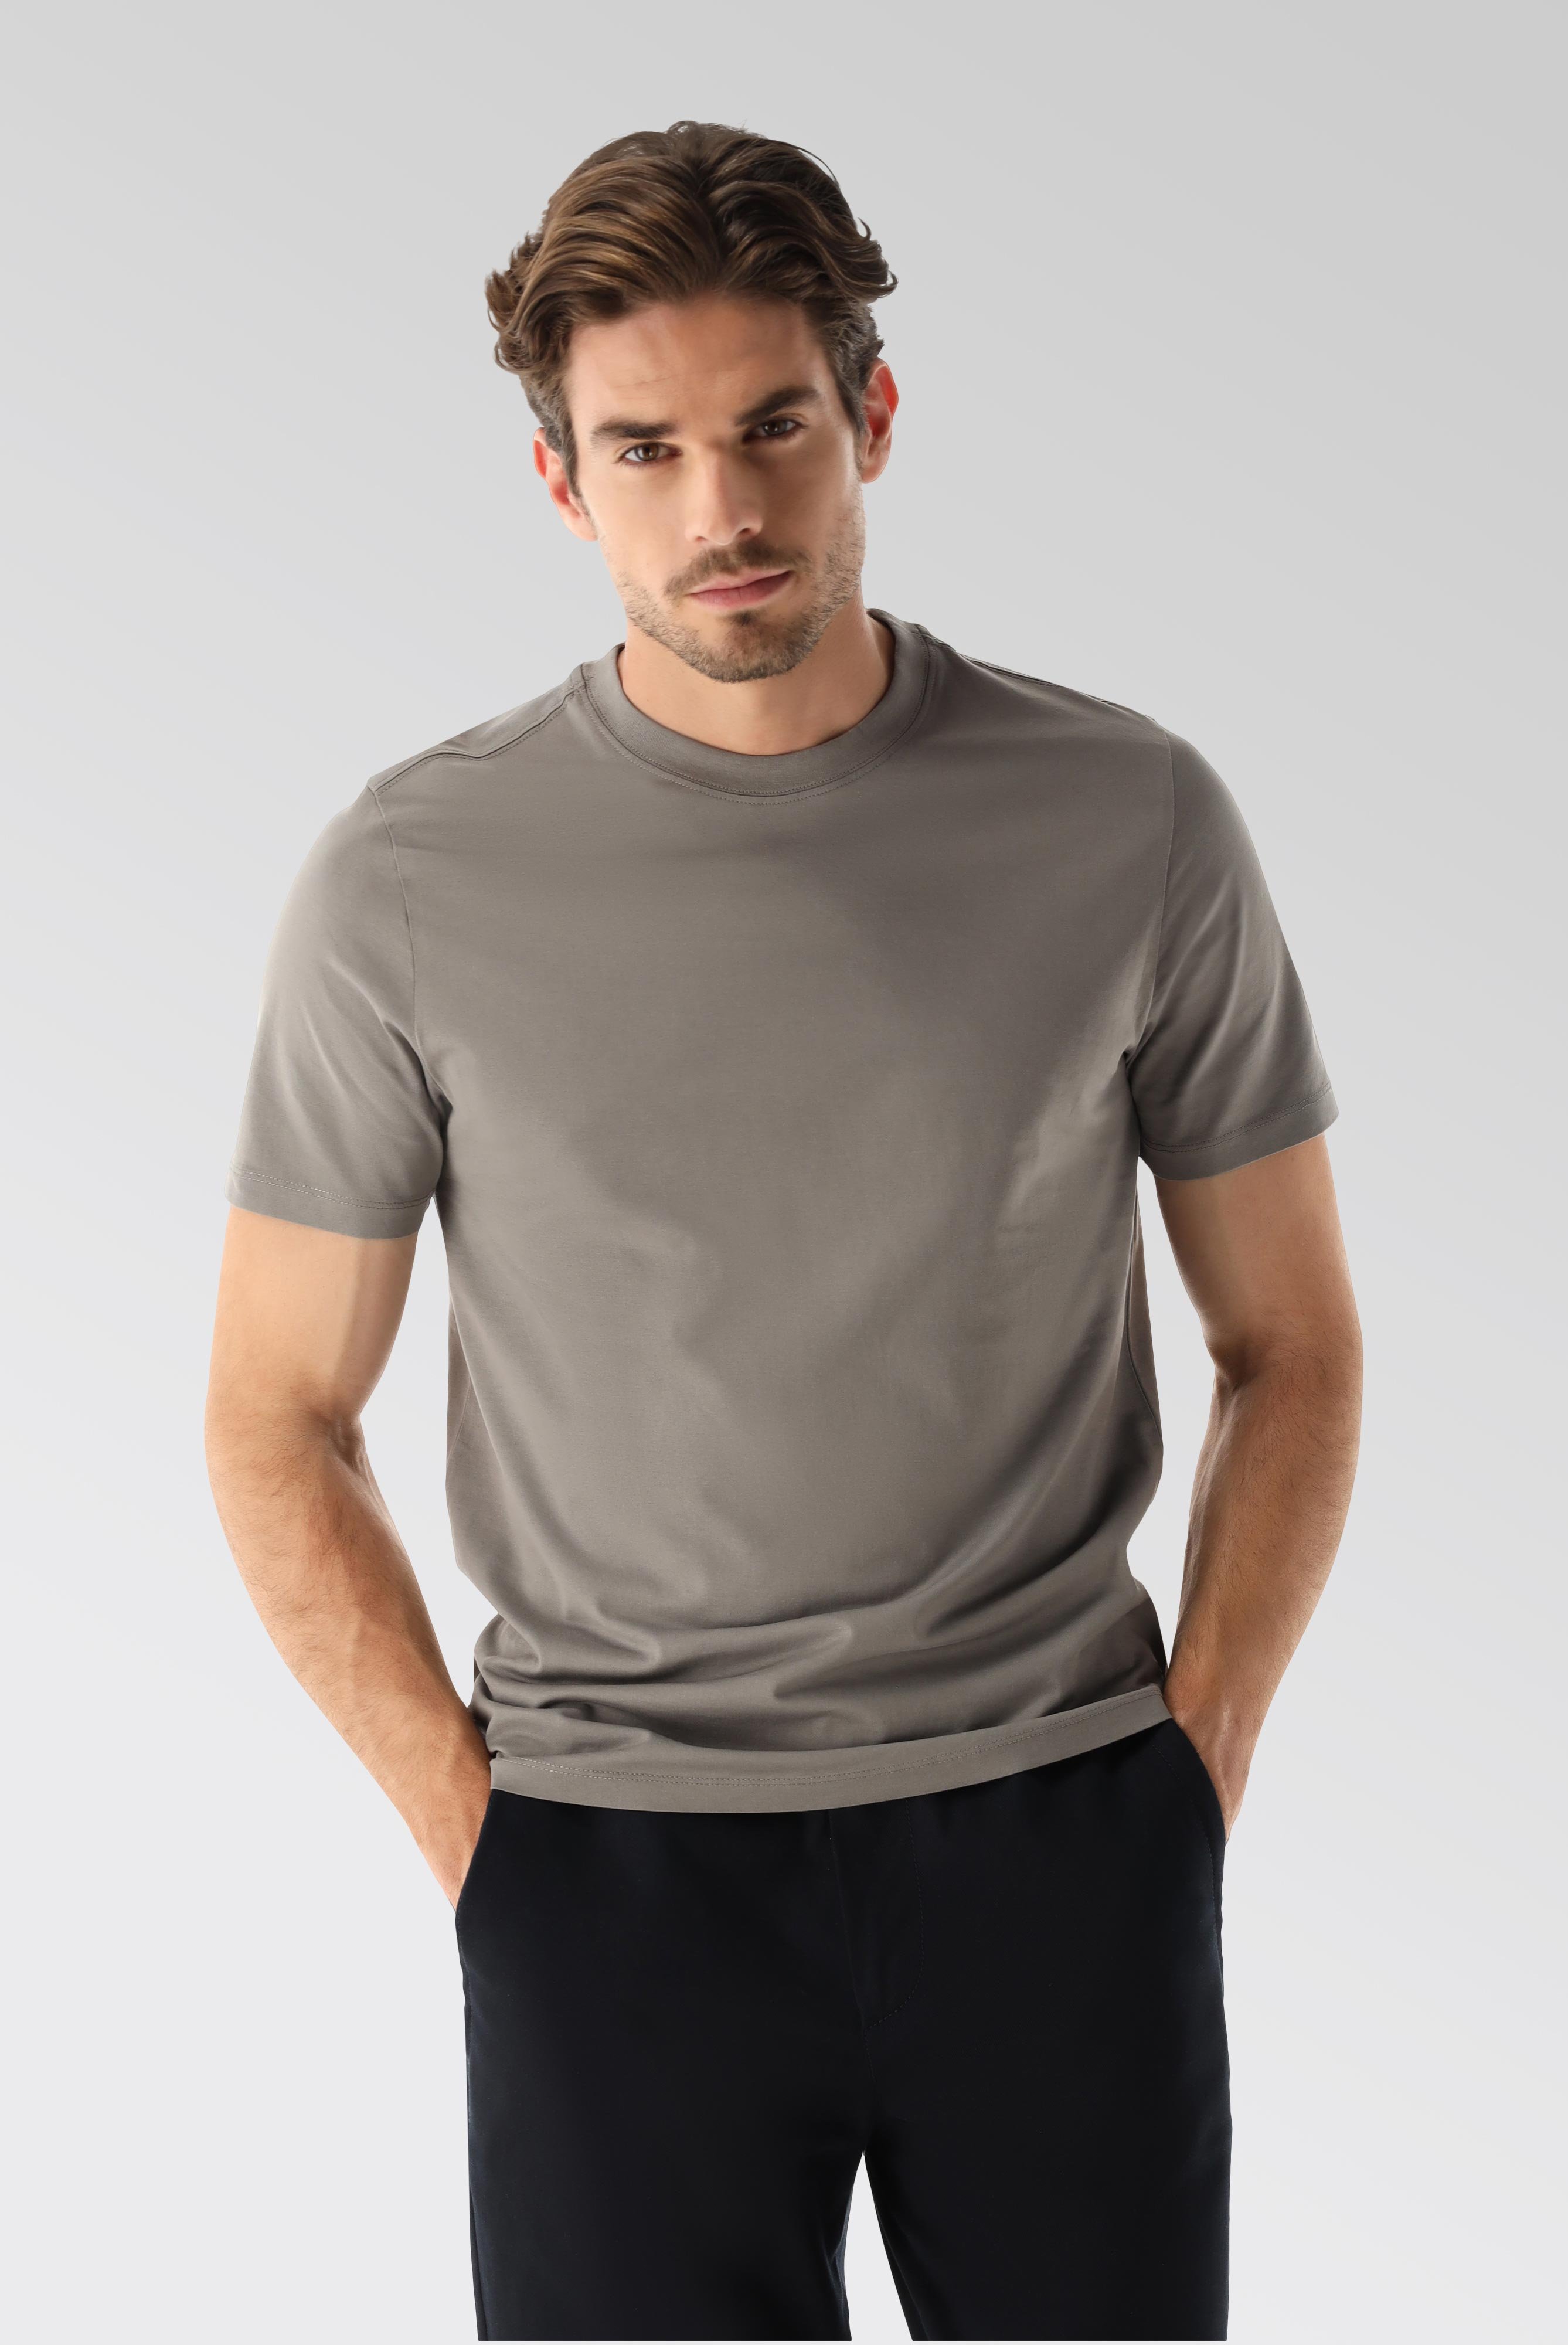 T-Shirts+Relaxed Fit Crew Neck Jersey T-Shirt+20.1660..Z20044.060.M